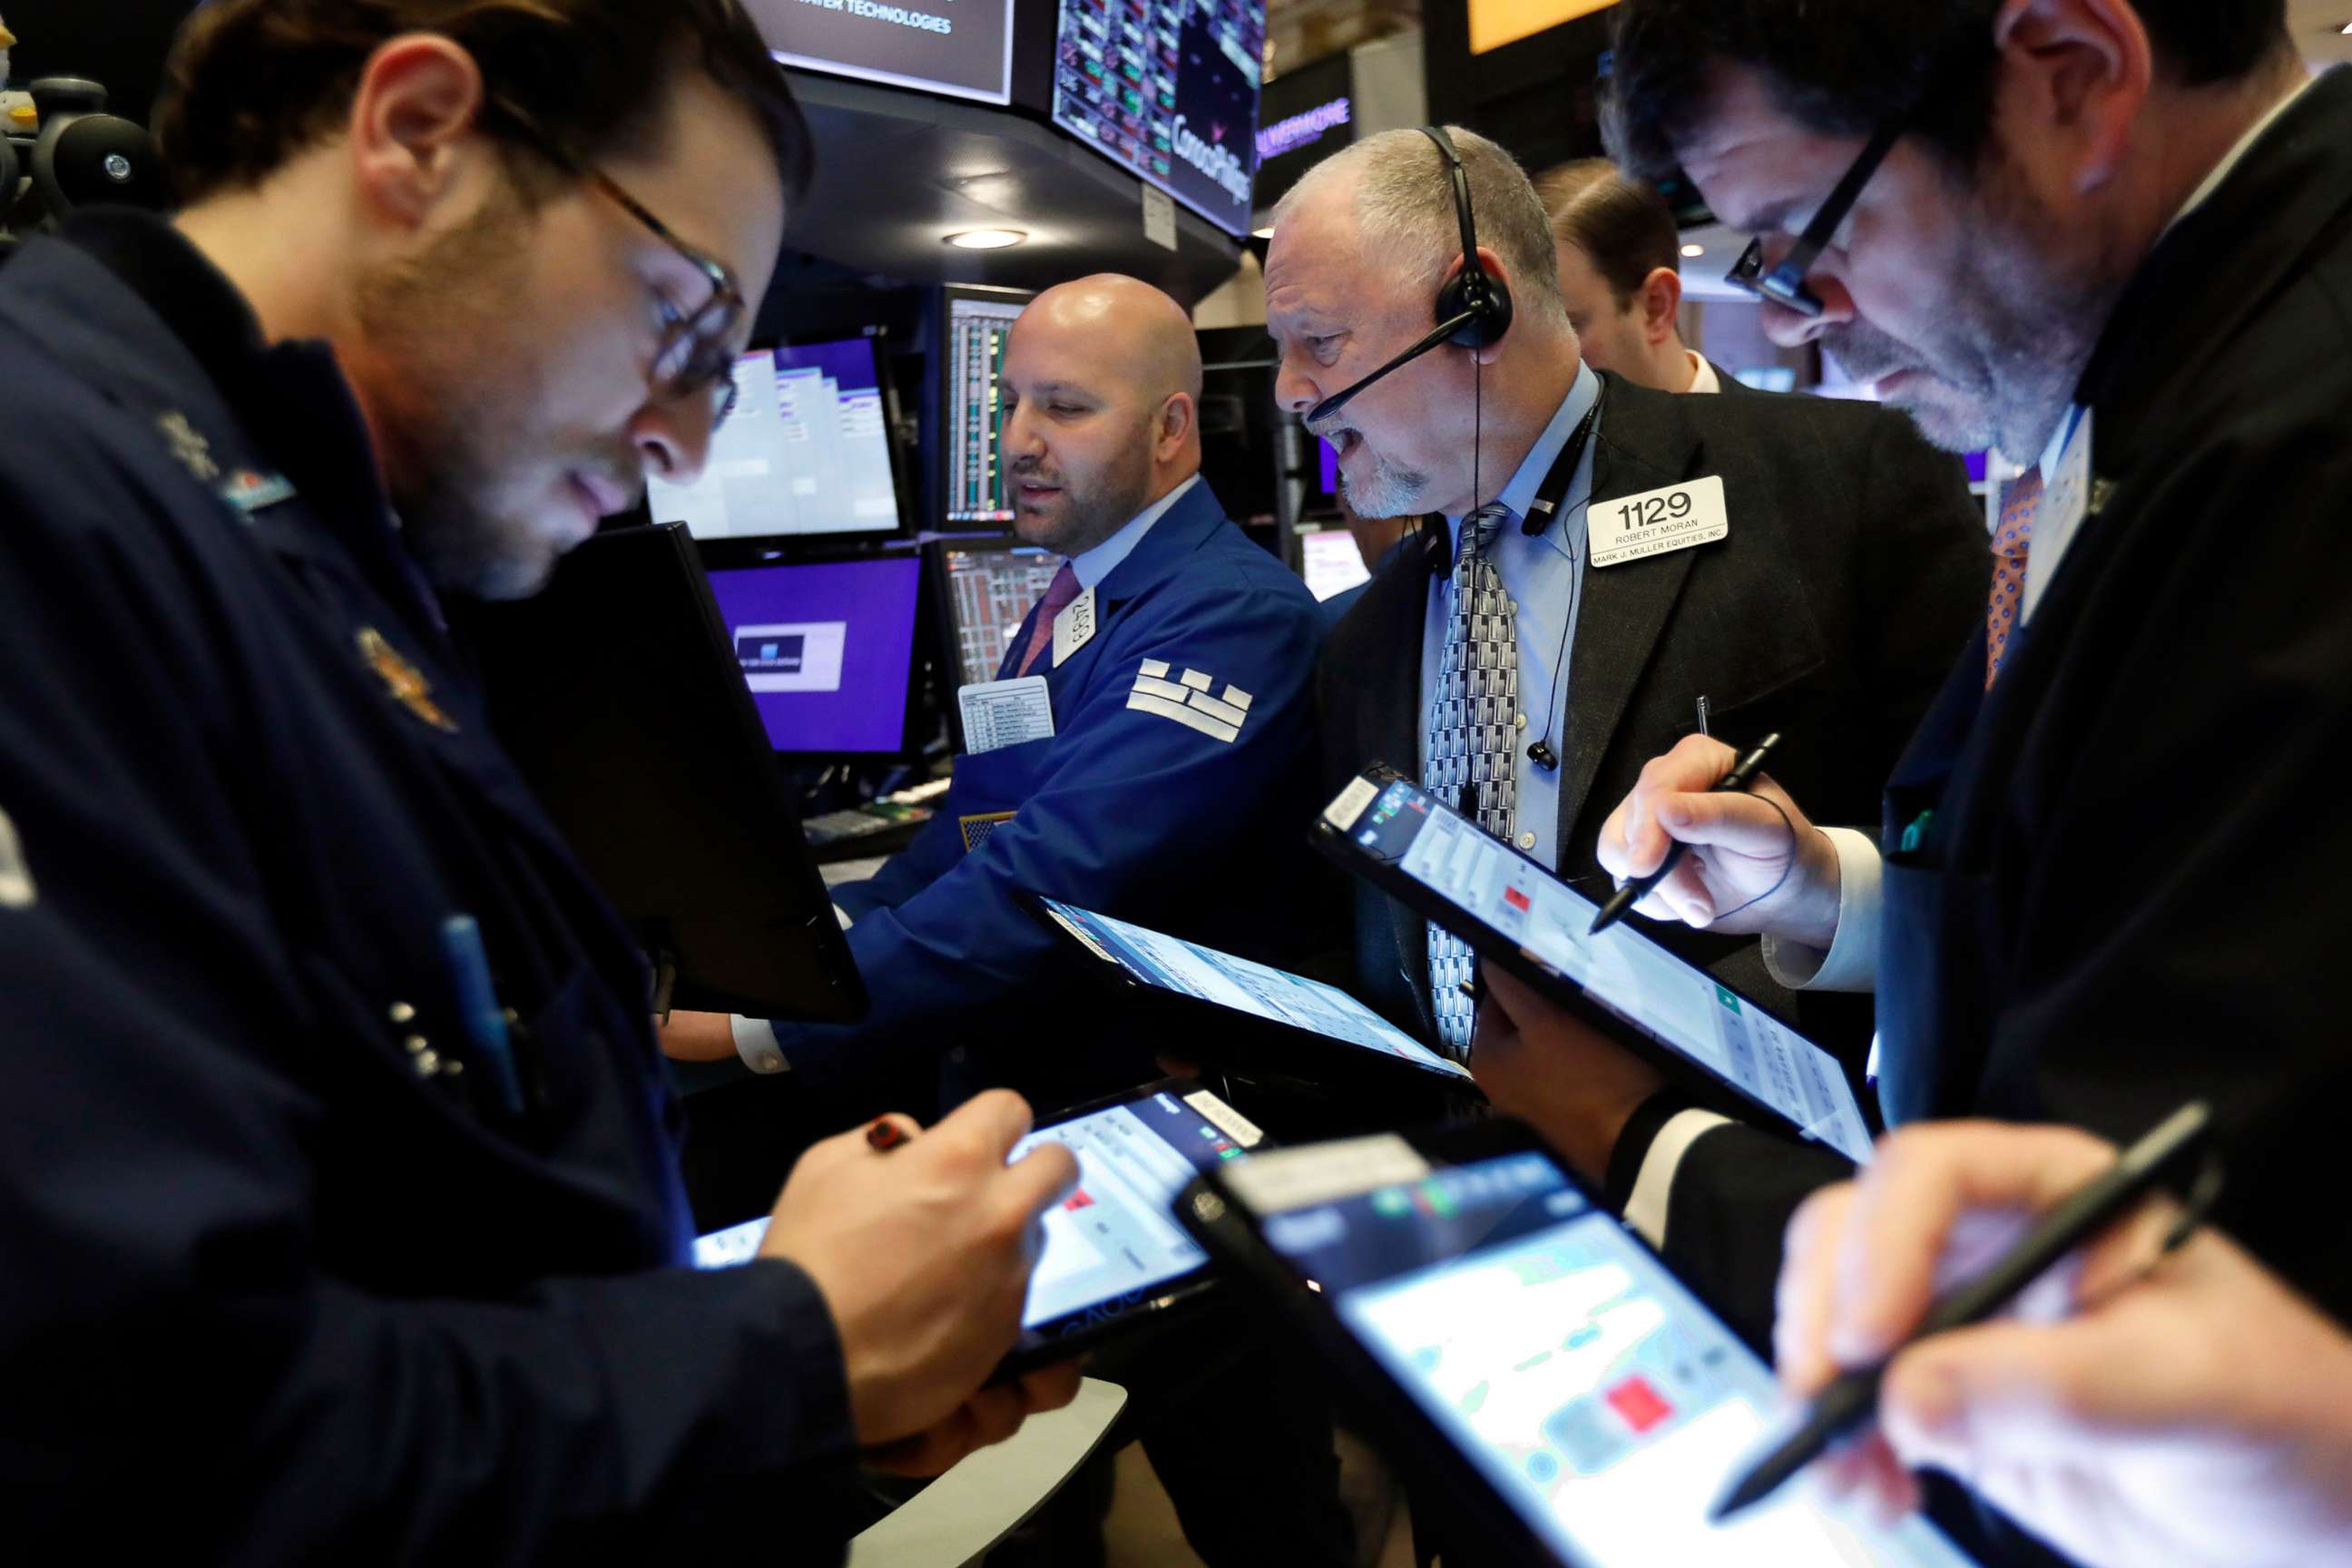 PHOTO: Specialist John Parisi, background center, works with traders at his post on the floor of the New York Stock Exchange, March 6, 2020.